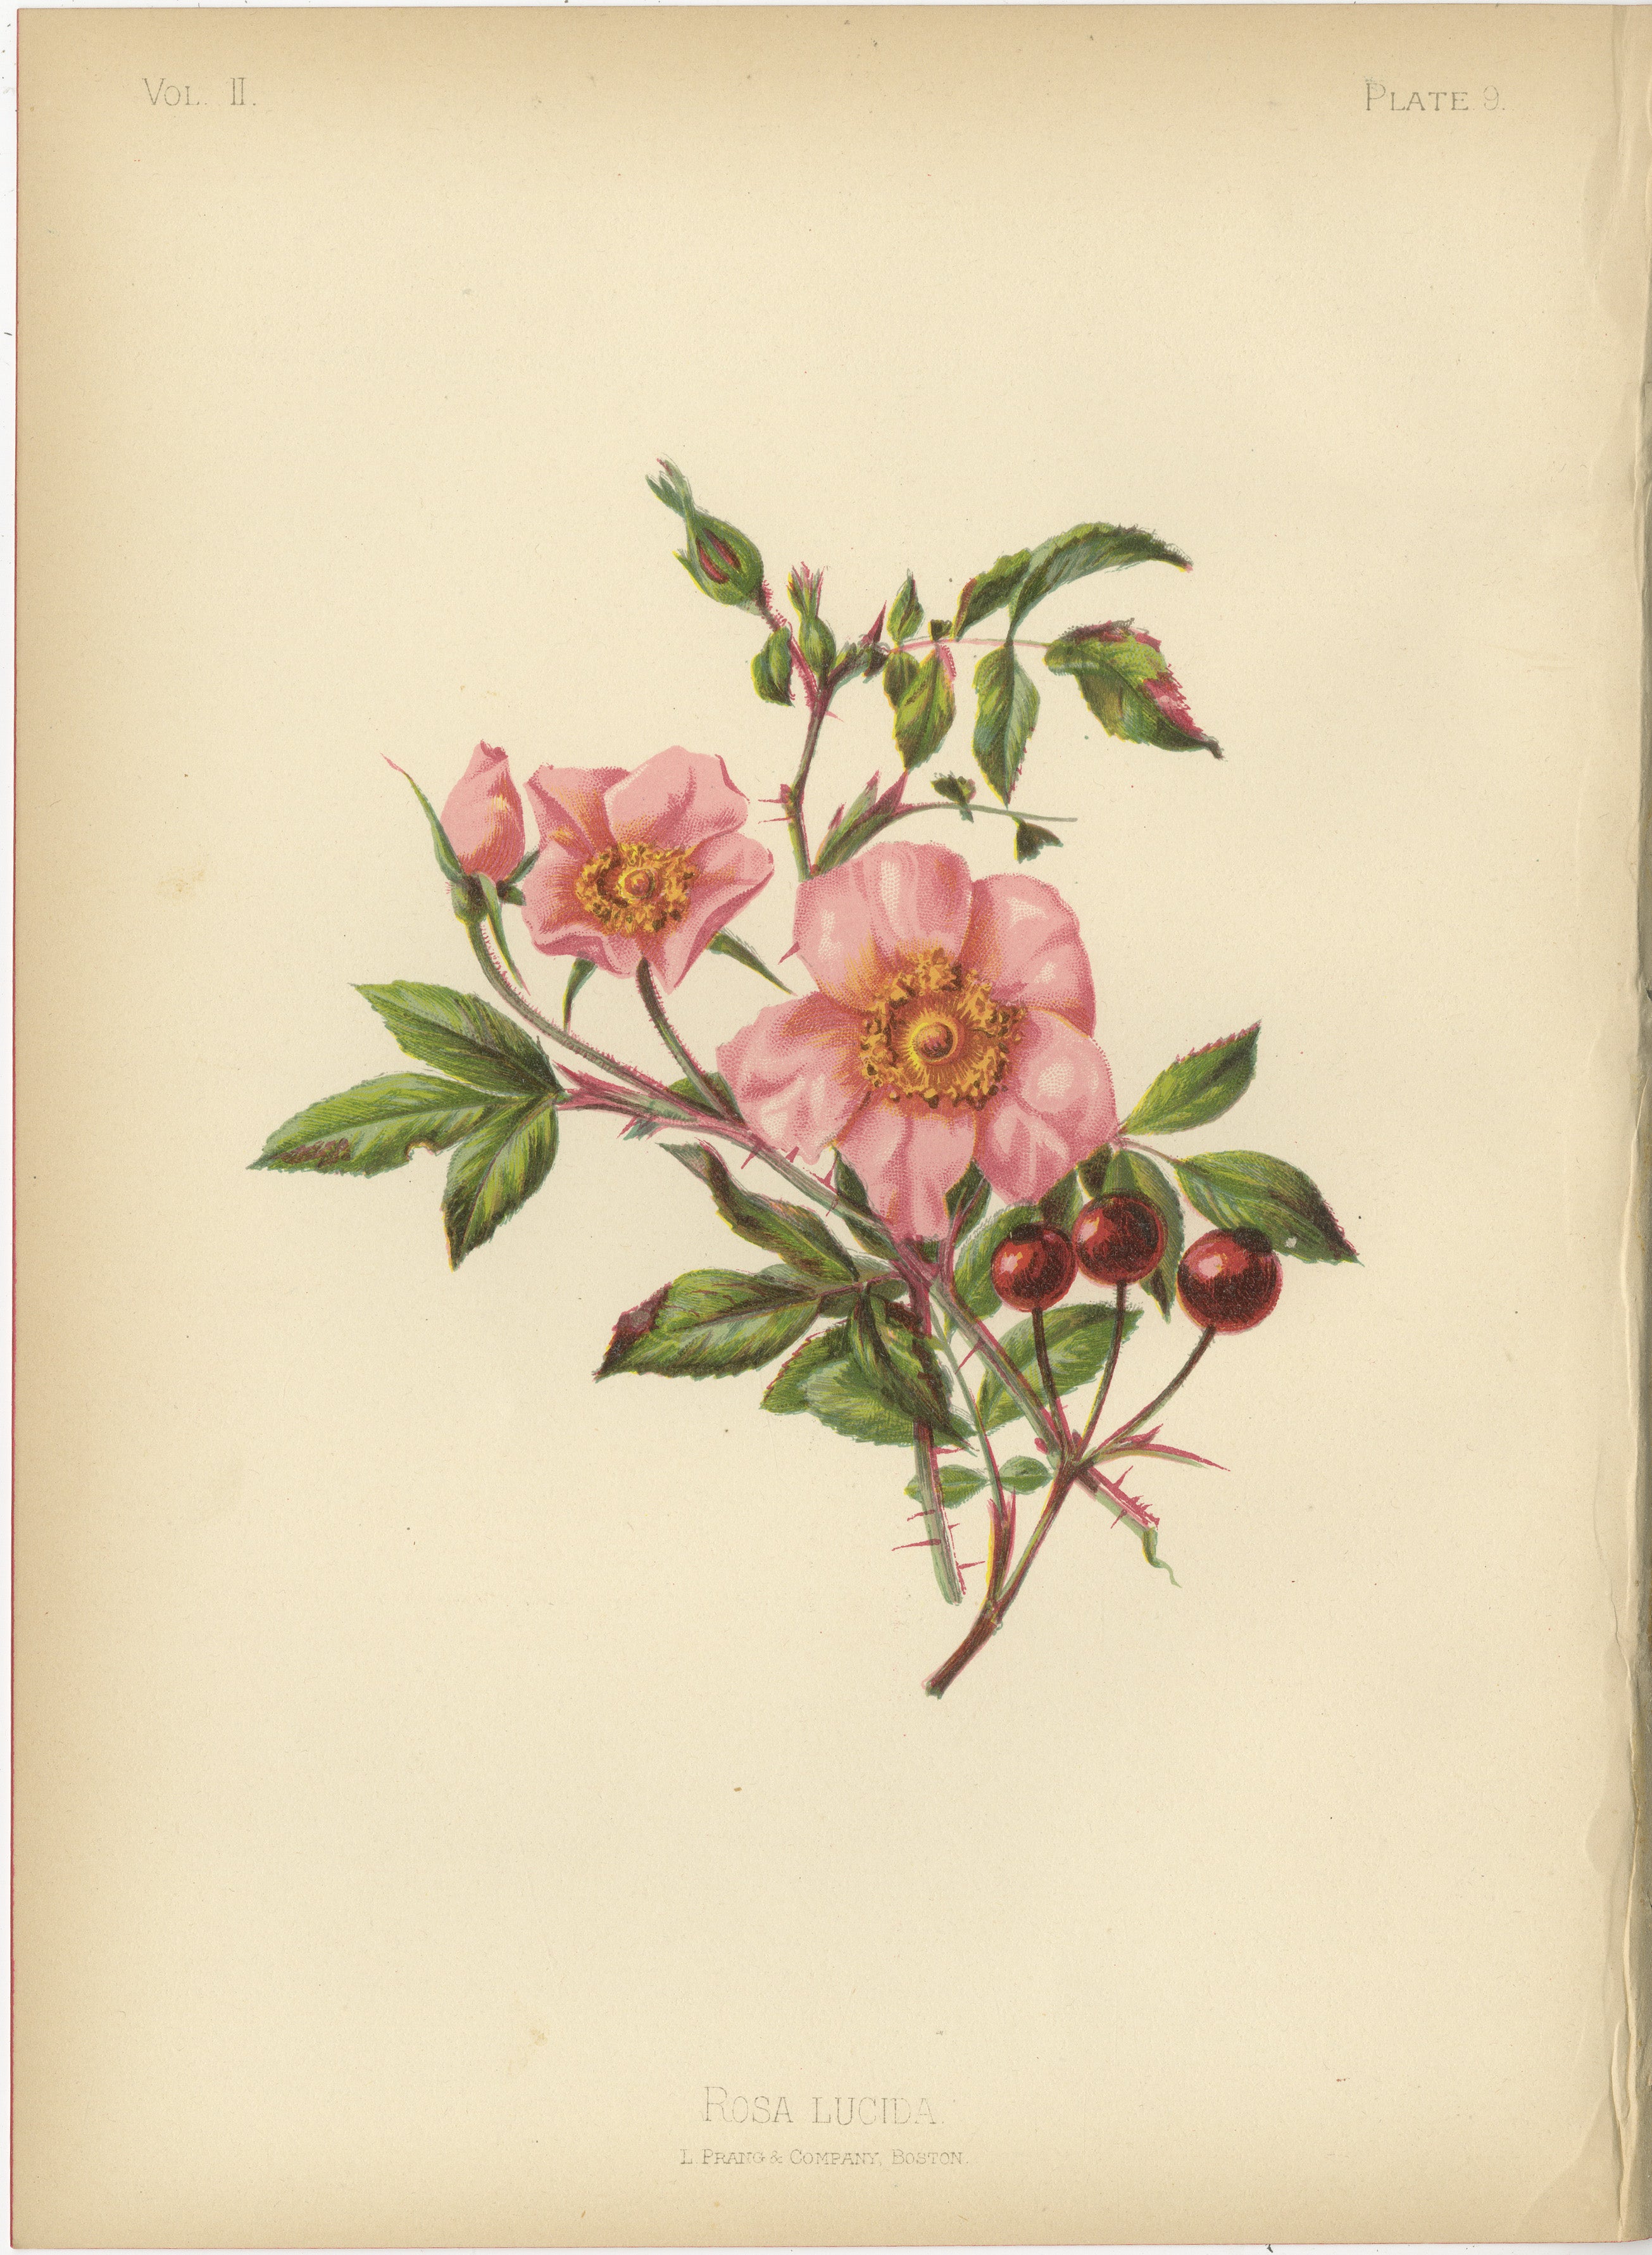 The  image on offer is a colored chromolithograph of Rosa lucida, commonly known as the shining rose. This illustration would have been featured in Thomas Meehan's 'The Native Flowers and Ferns of the United States', published in 1879.

The Rosa